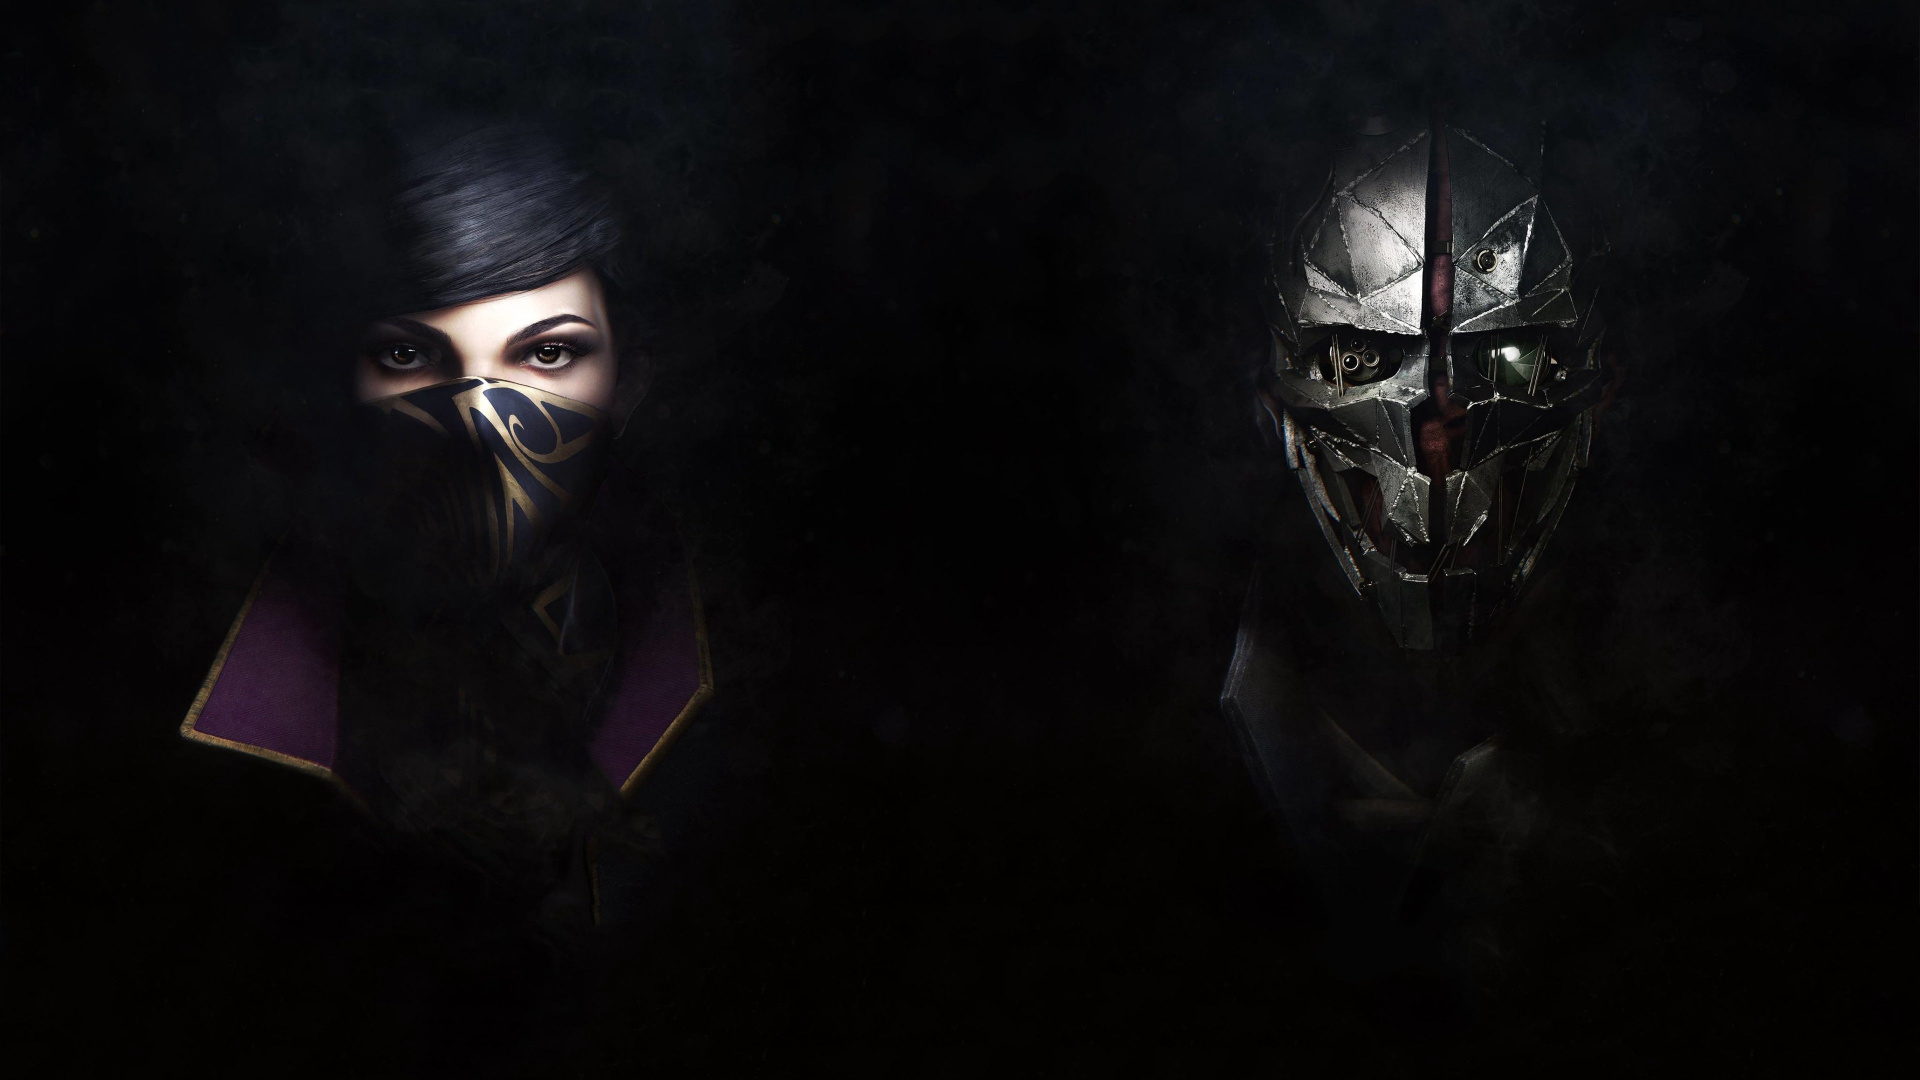 Dishonored 2, Déshonoré, Bethesda Softworks, Jeu D'infiltration, Obscurité. Wallpaper in 1920x1080 Resolution